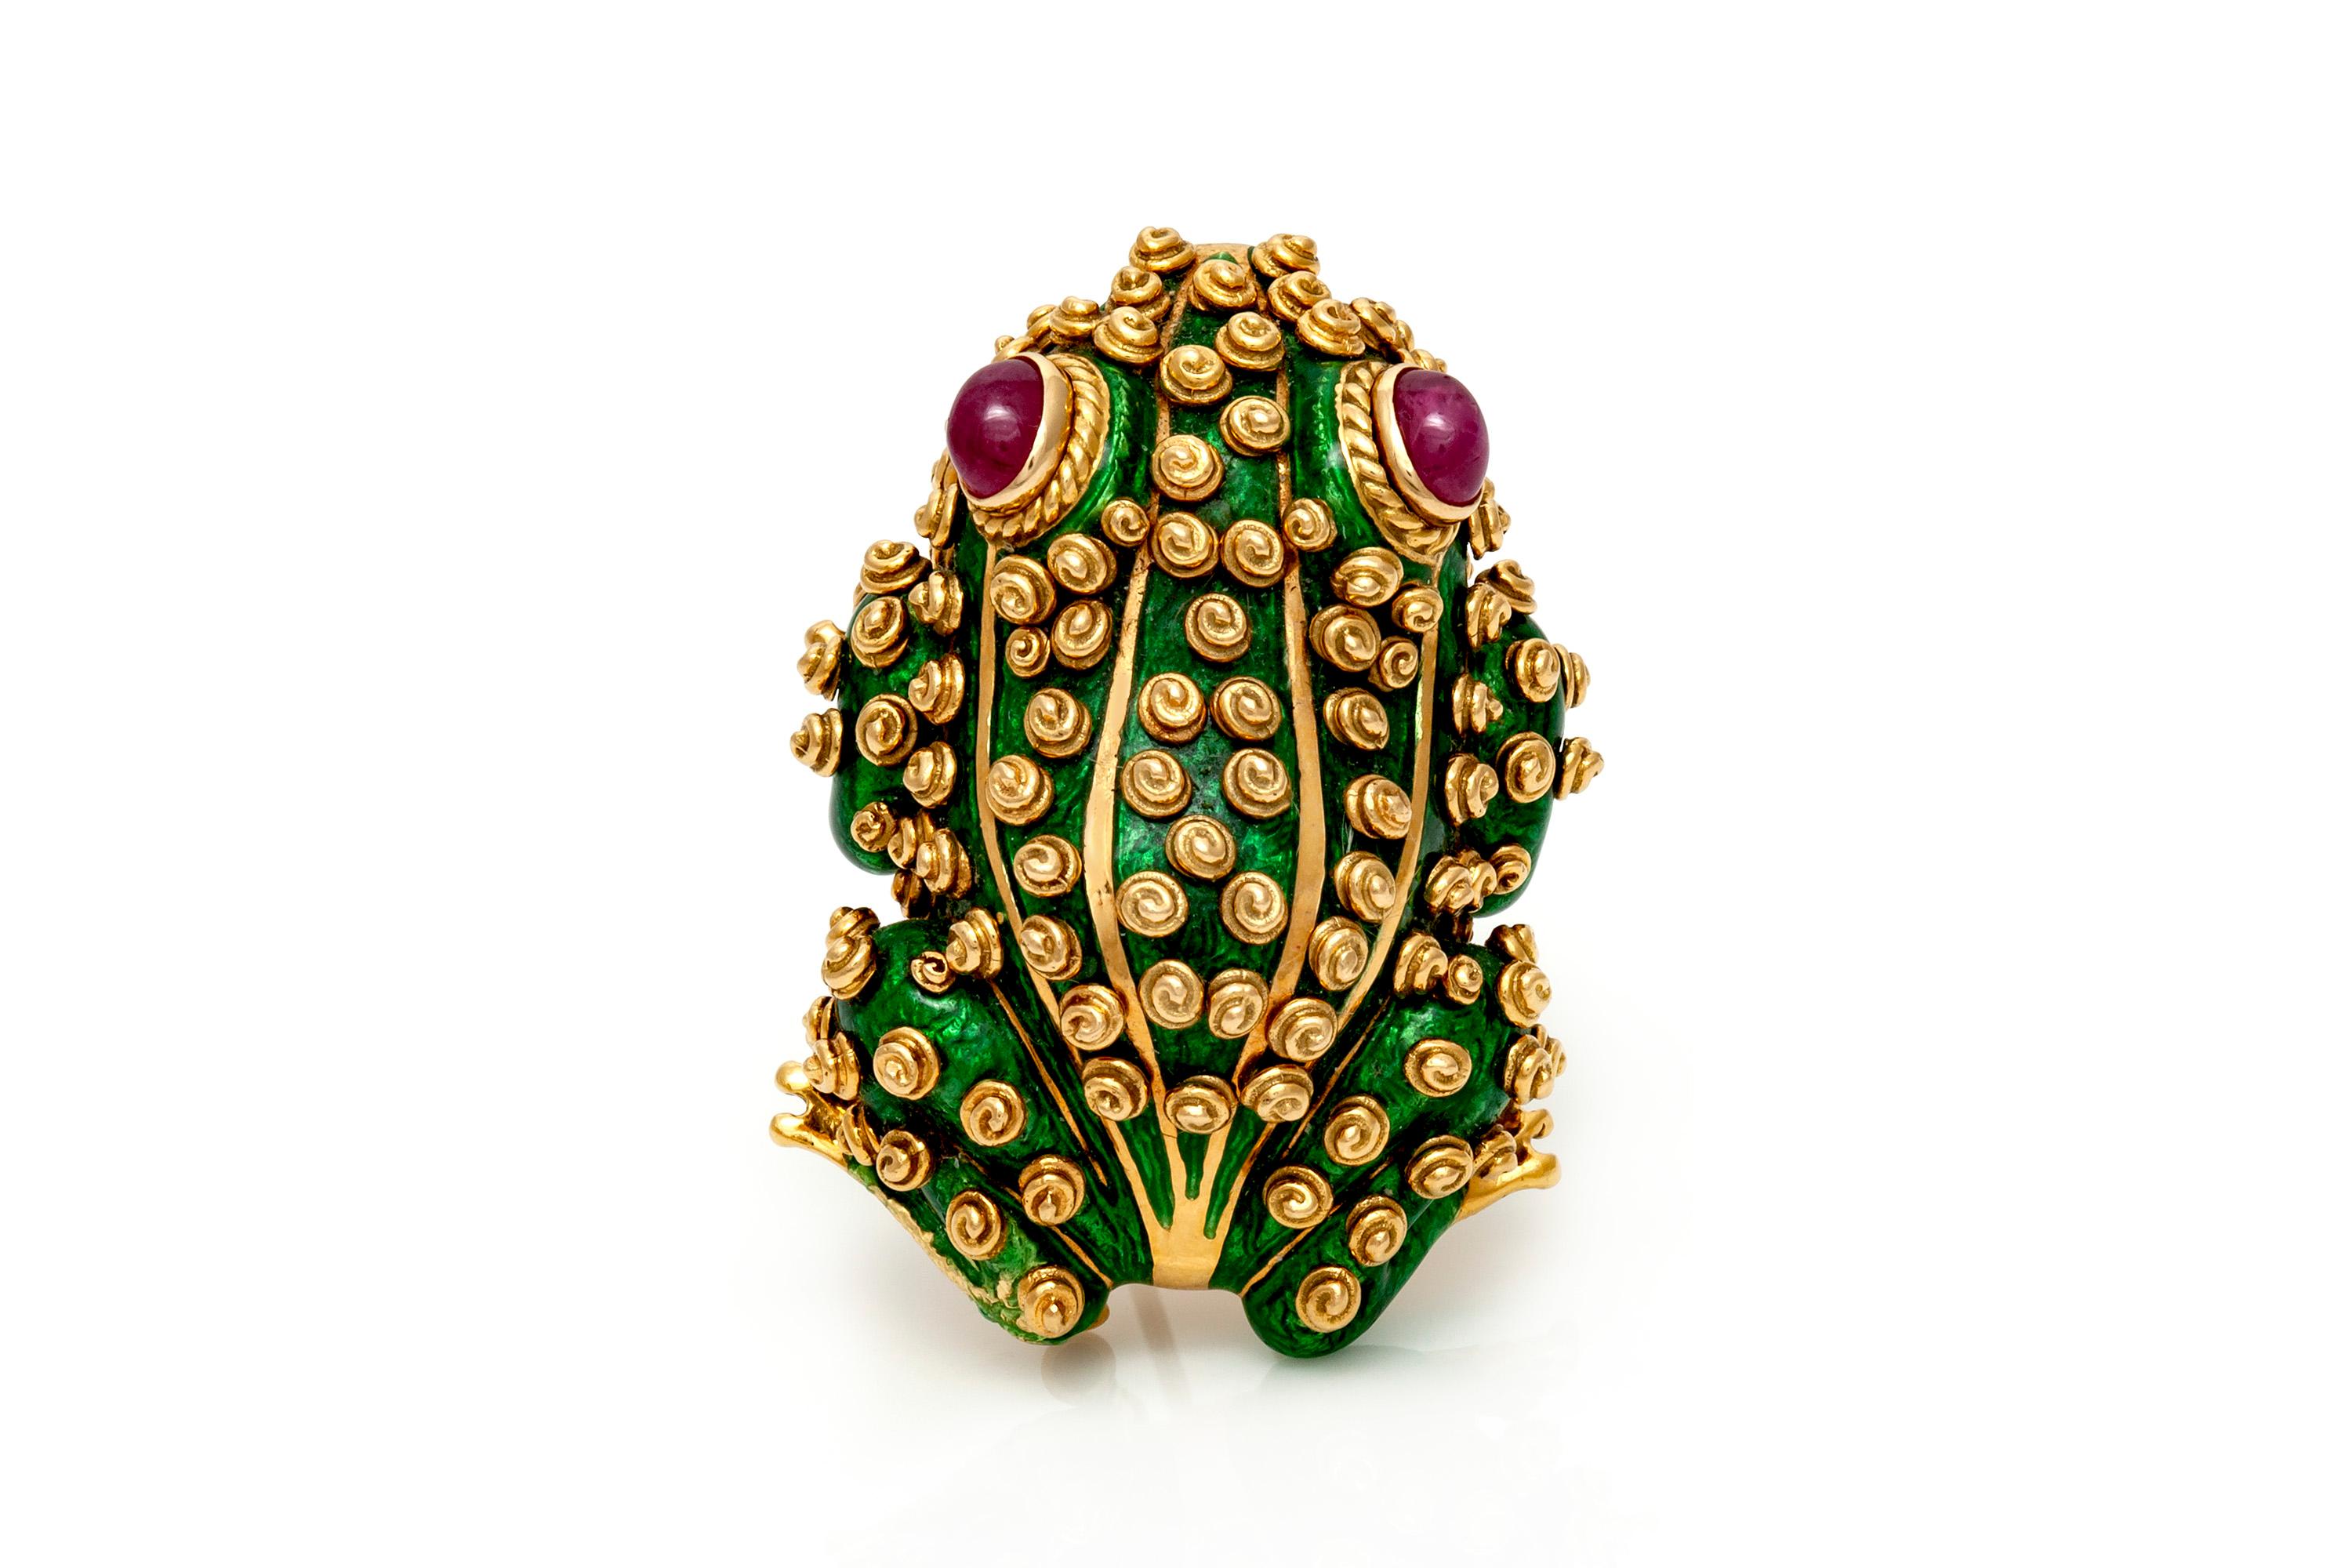 Frog brooch, finely crafted in 18k yellow gold with a green enamel featuring sharp body lines and spiraled dots for a lifelike appearance. Eyes are first surrounded by a rope border with perfectly matched, bezel set cabochon rubies. Finished with a